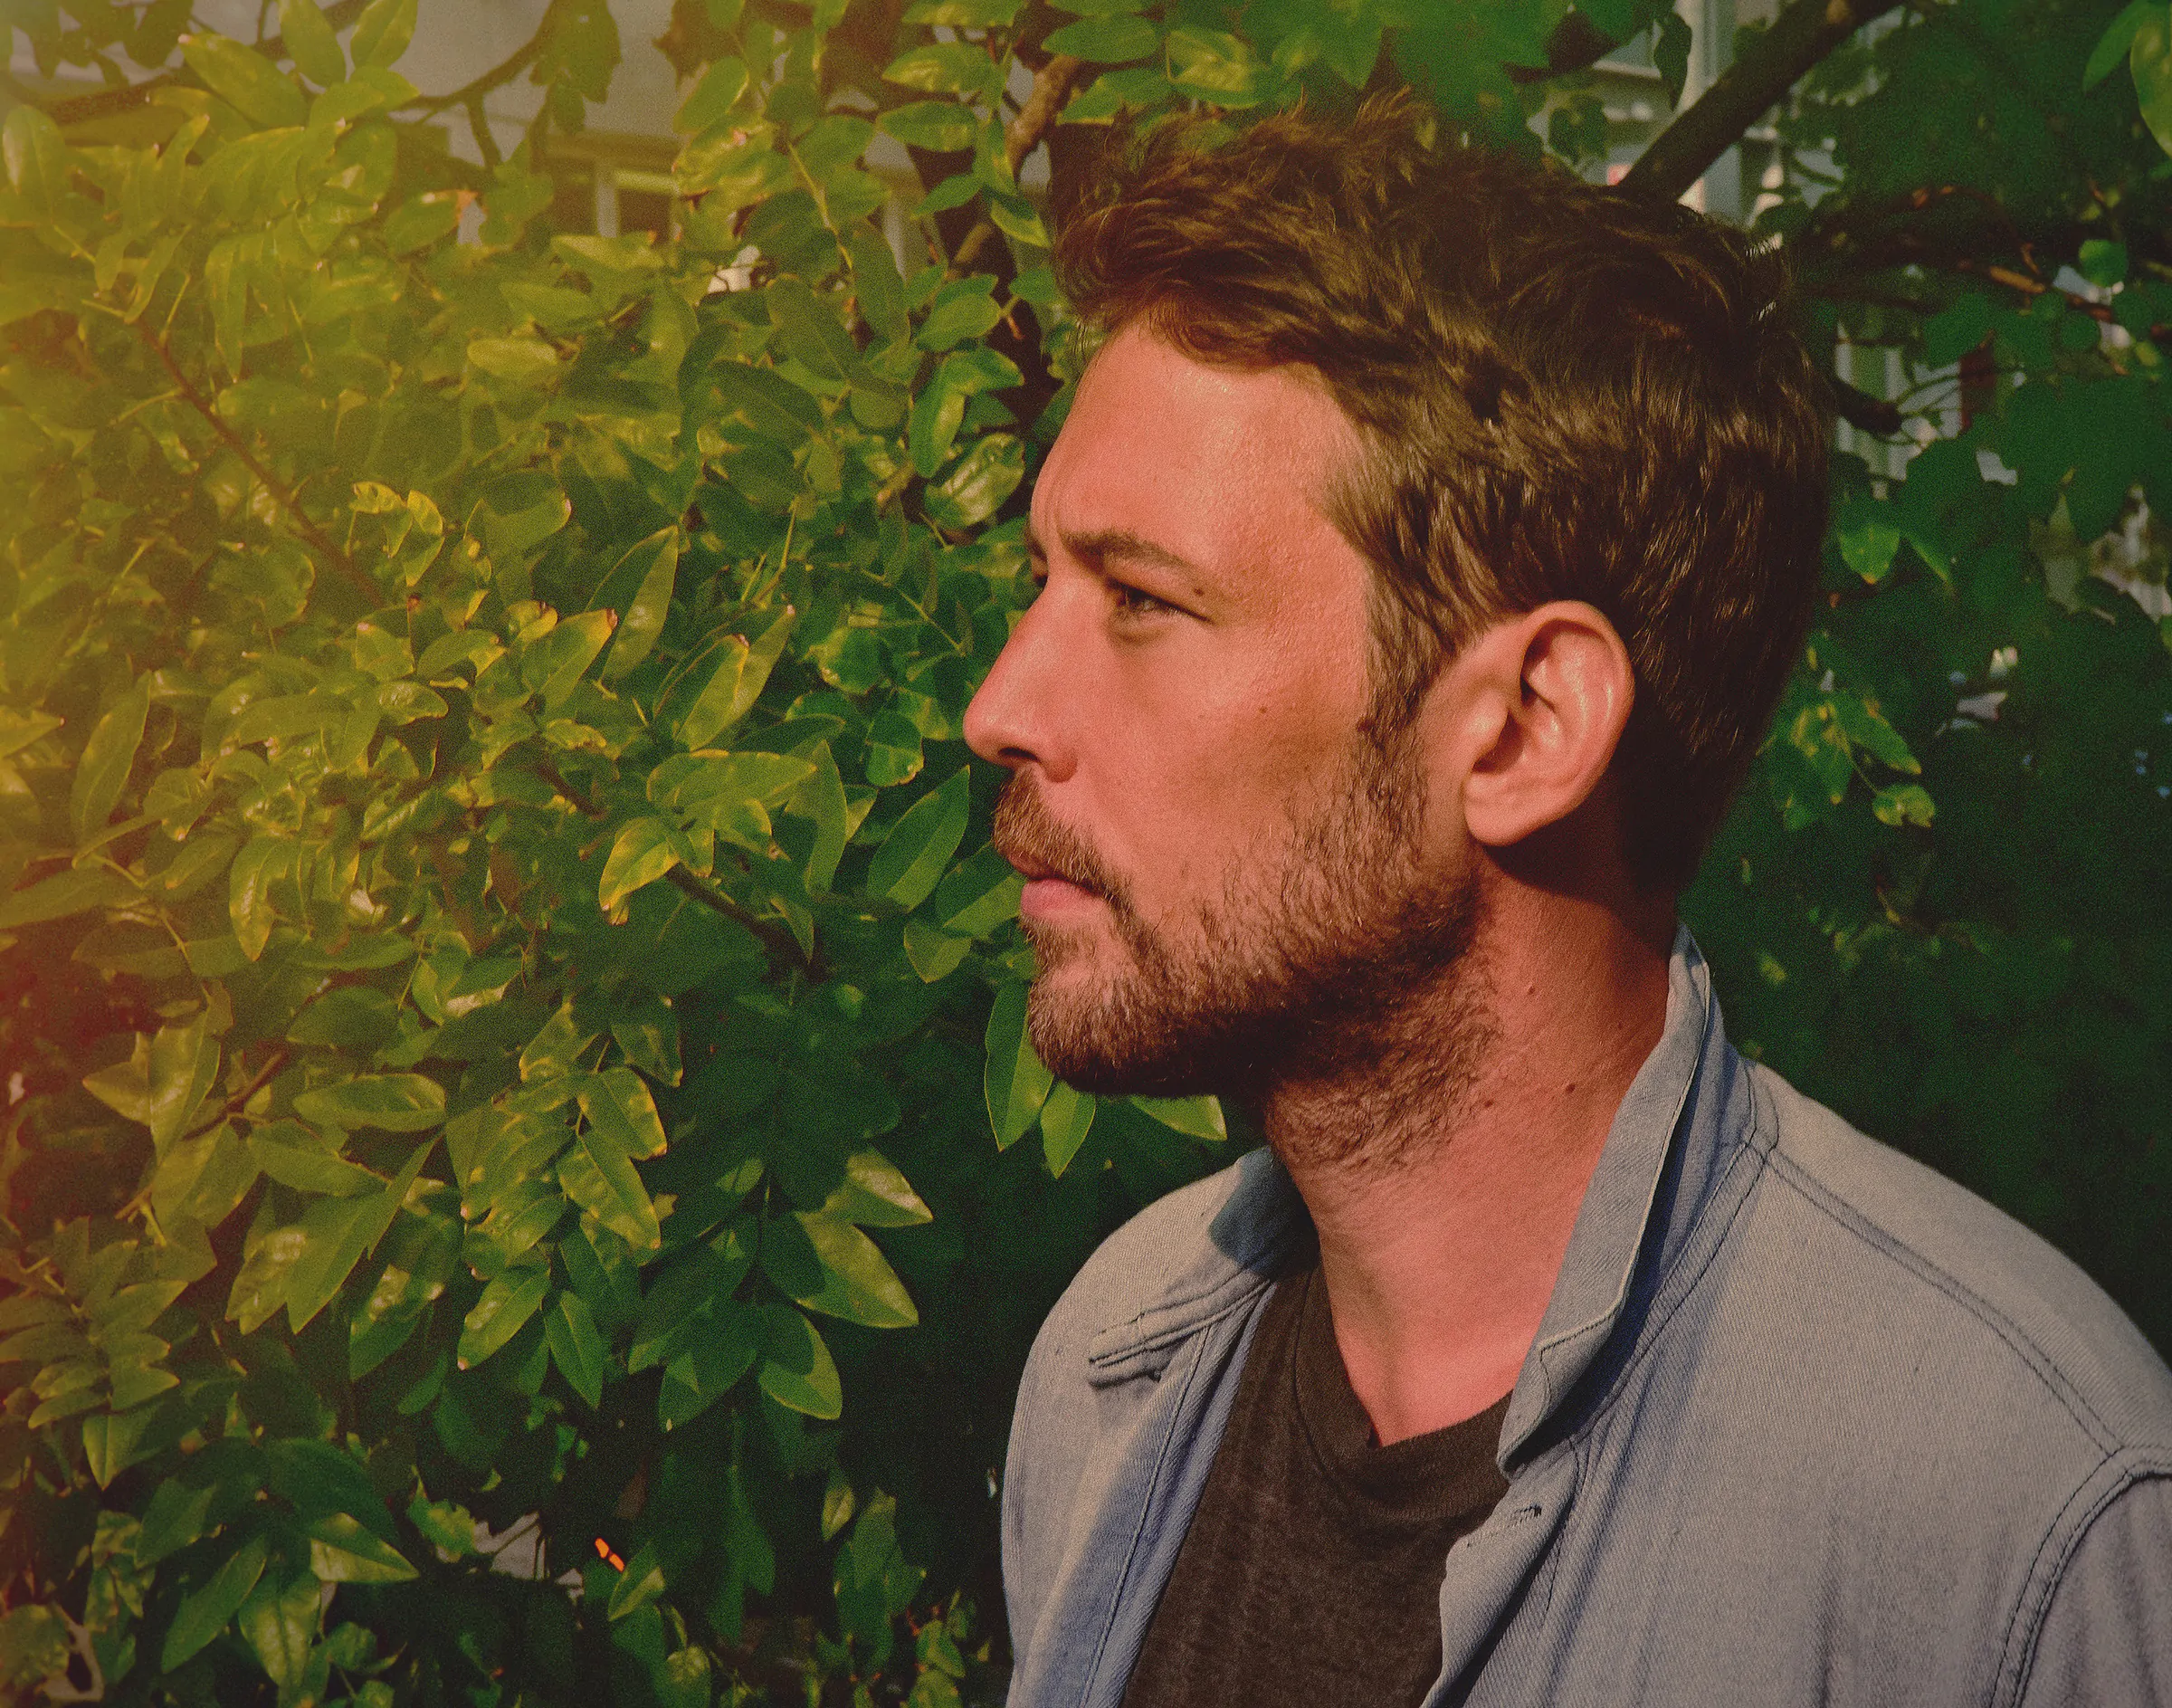 FLEET FOXES release video for ‘I’m Not My Season’ – Watch Now!